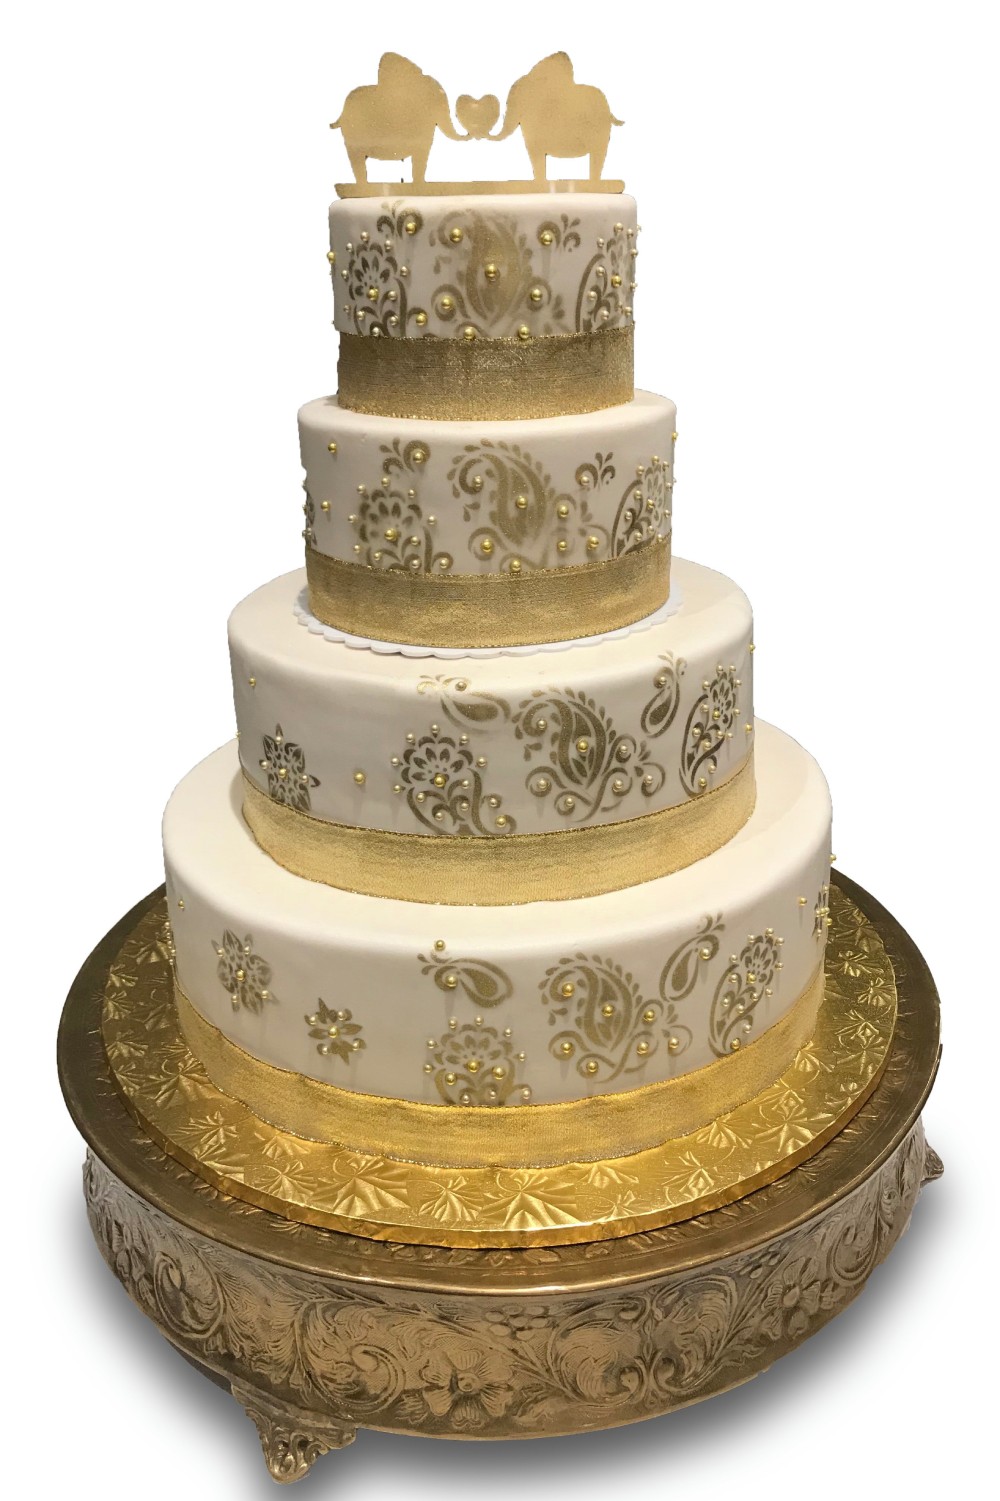 Fondant covered cake with gold paisley pattern and gold elephant topper 